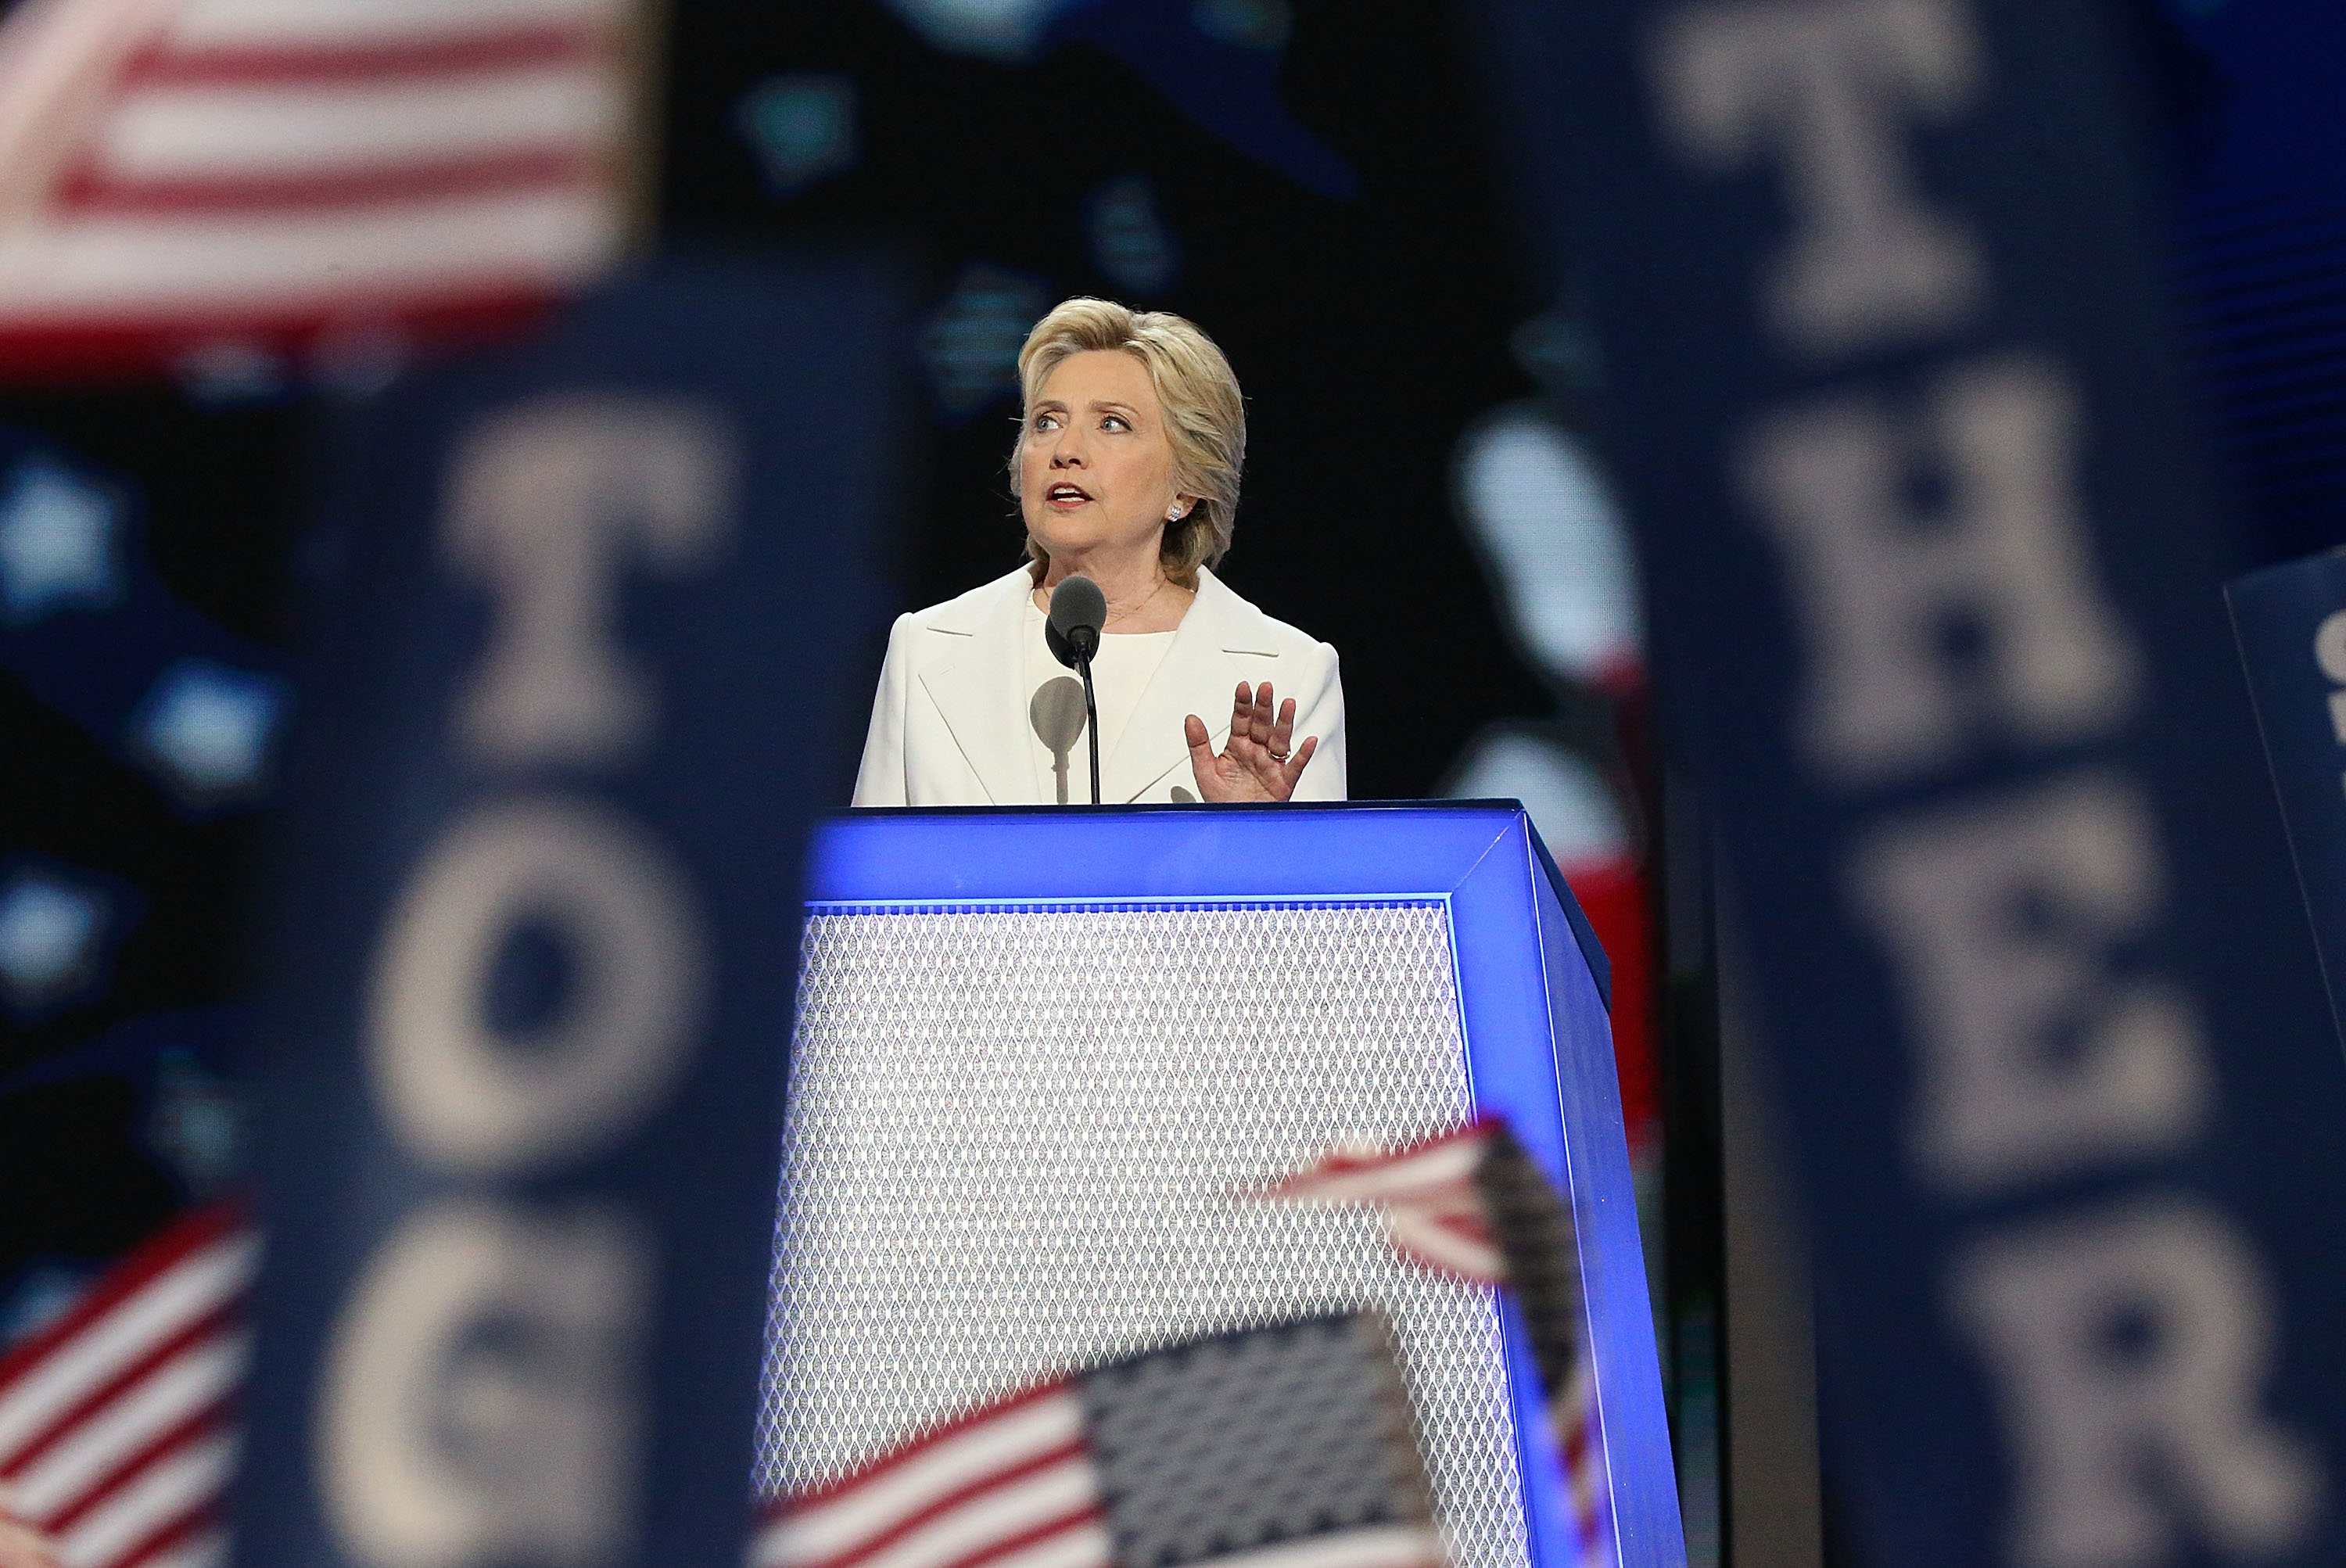 Hillary Clinton speaks at the 2016 Democratic National Convention